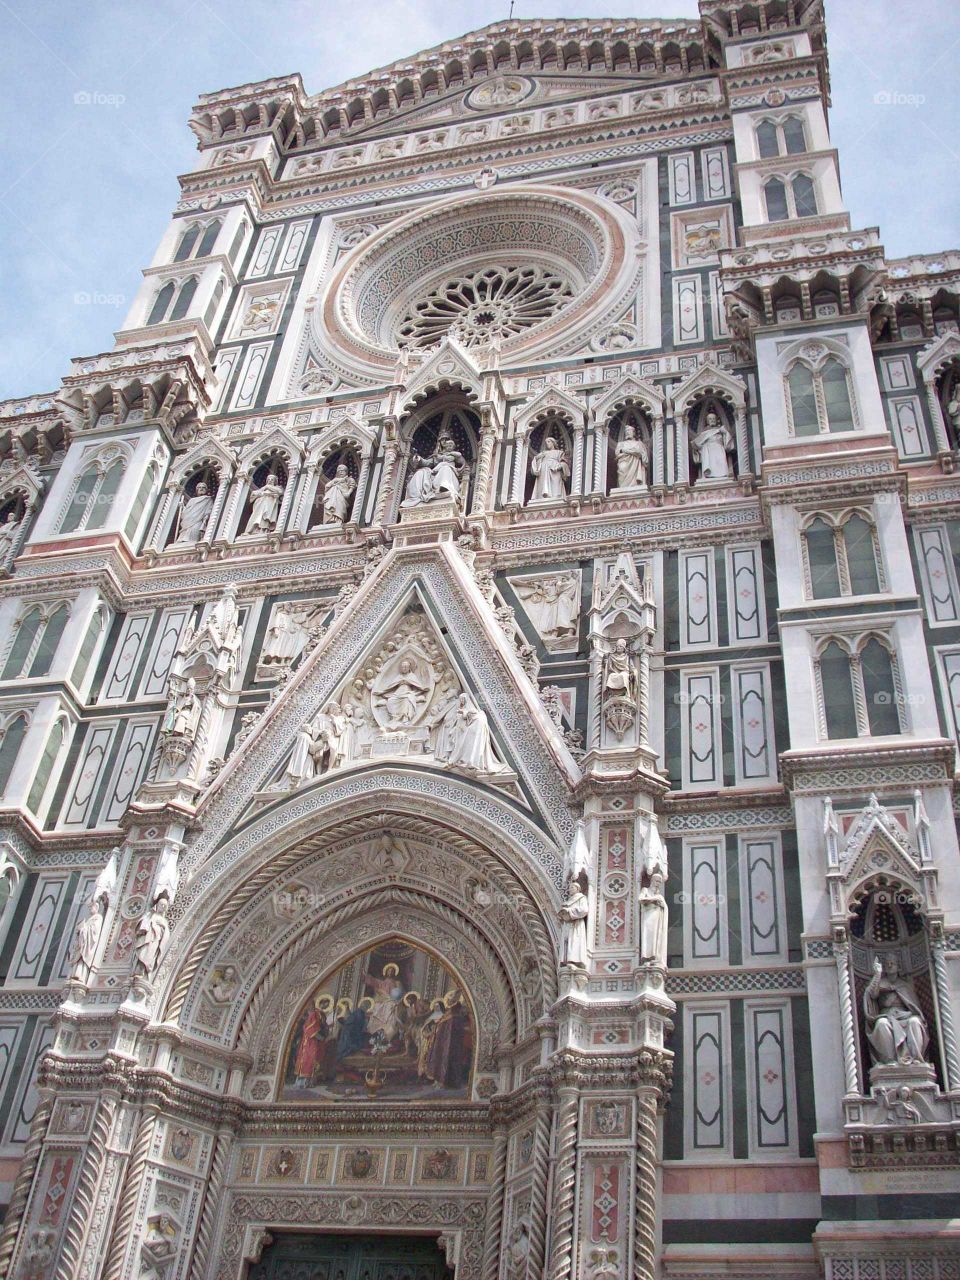 The magnificent Duomo of Florence, looking up